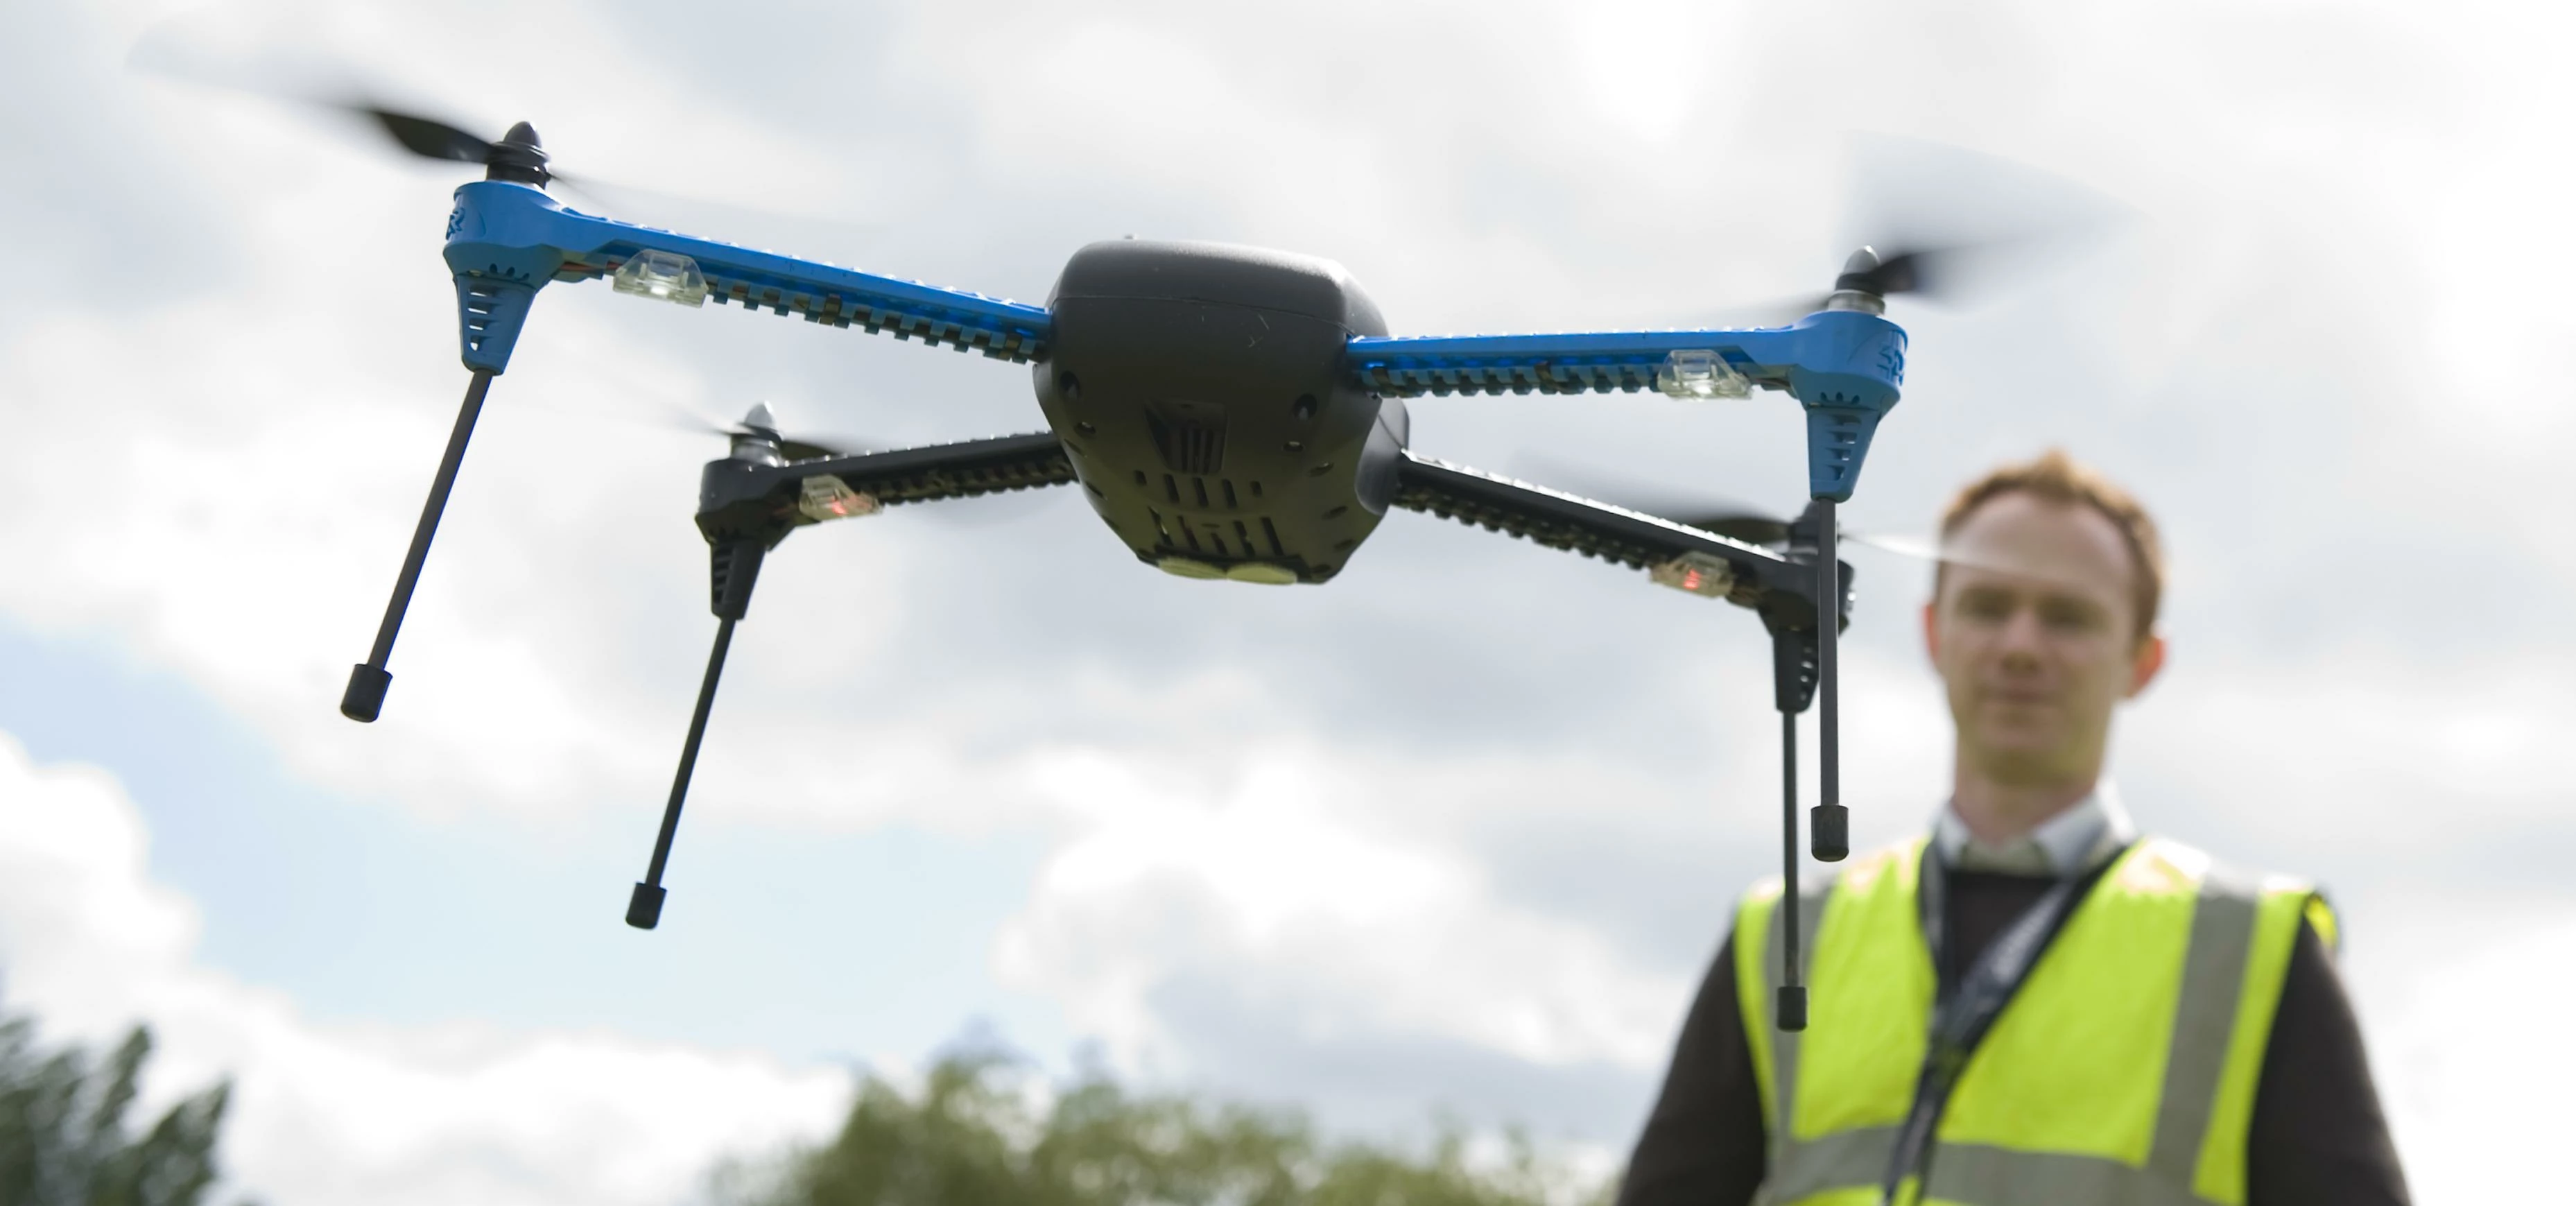 Richard Parker, founder and CEO, flying a drone